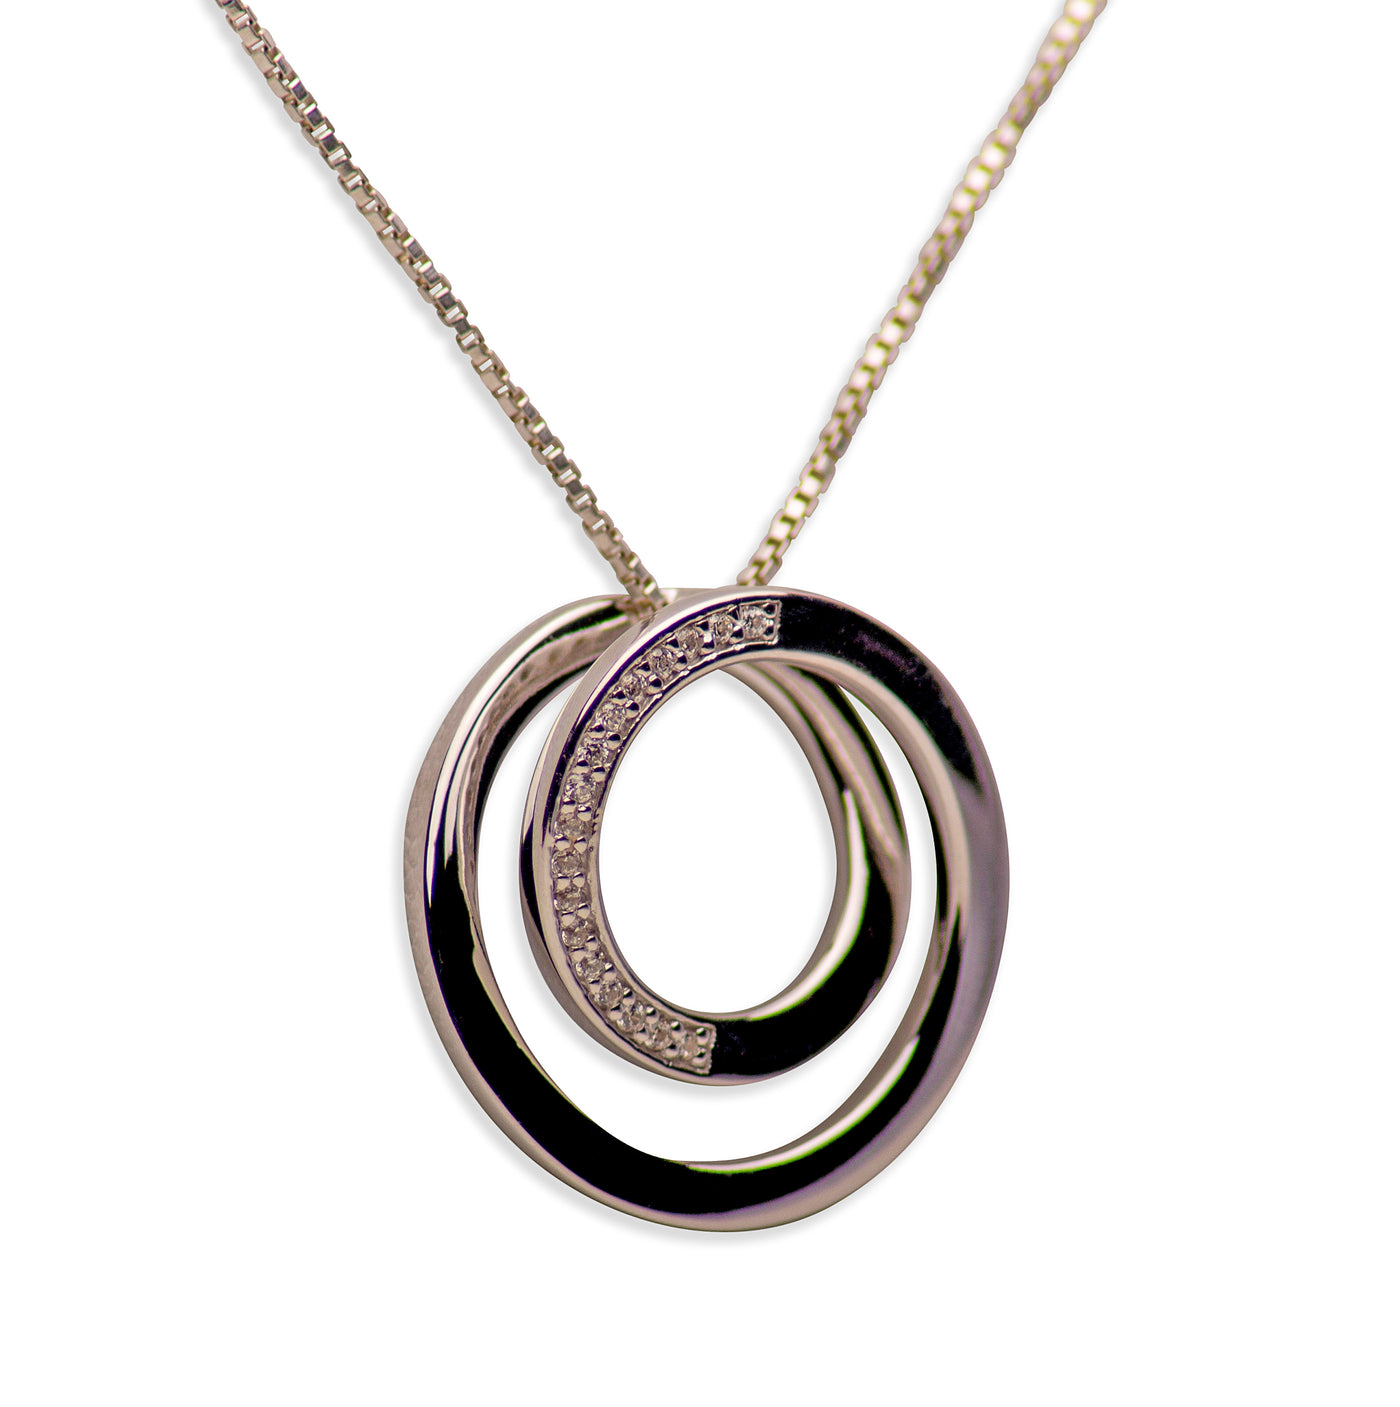 3D Infinity Circle Rhodium Plated Sterling Silver Pendant Necklace